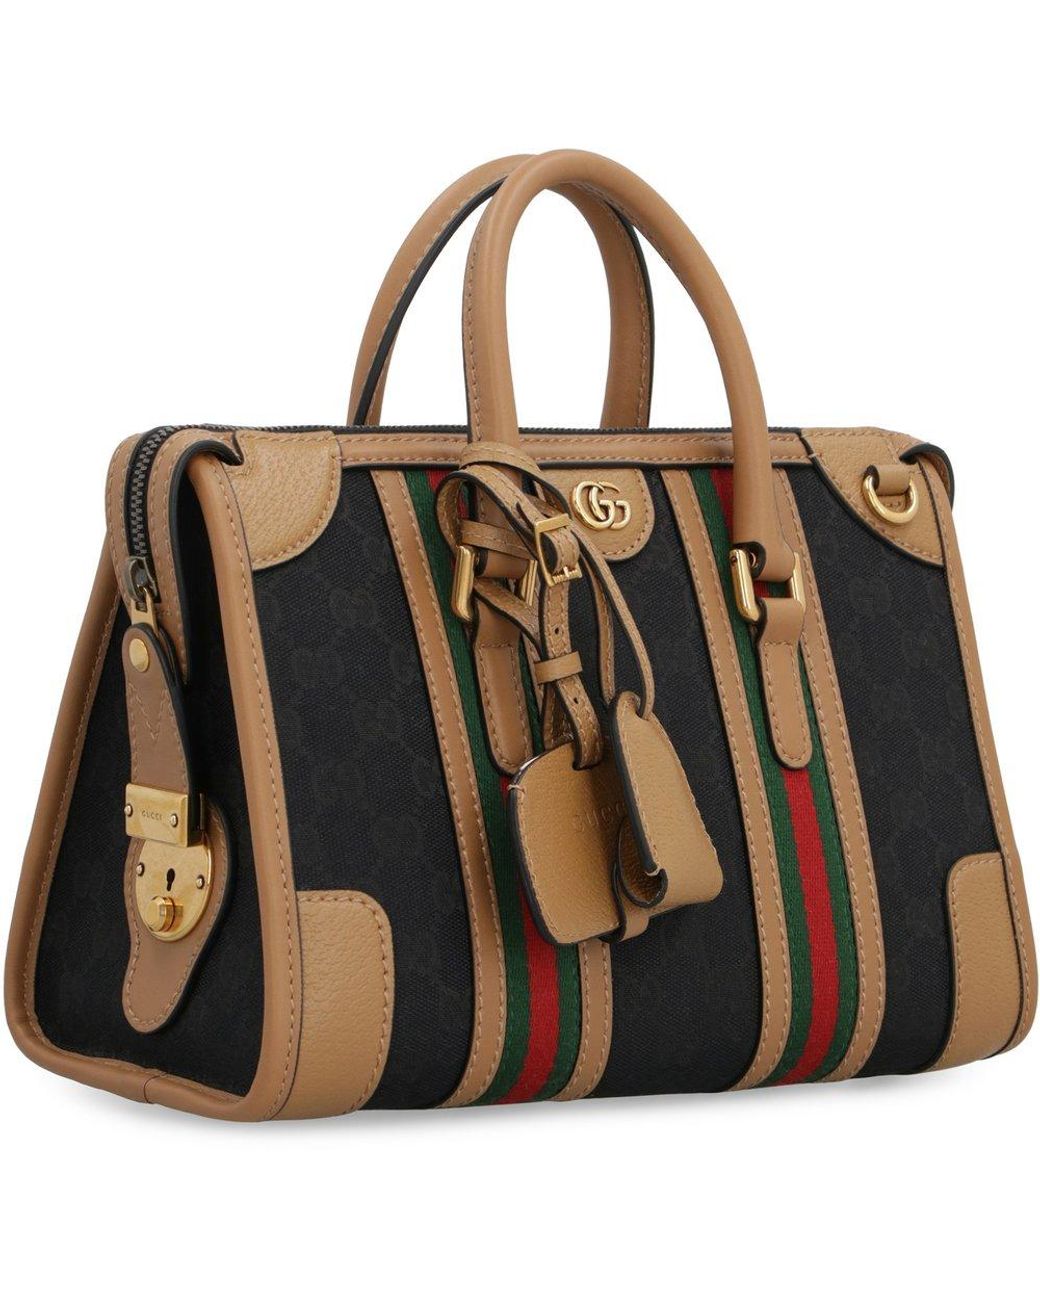 Gucci Small Top Handle Bag With Double G In Black GG Canvas